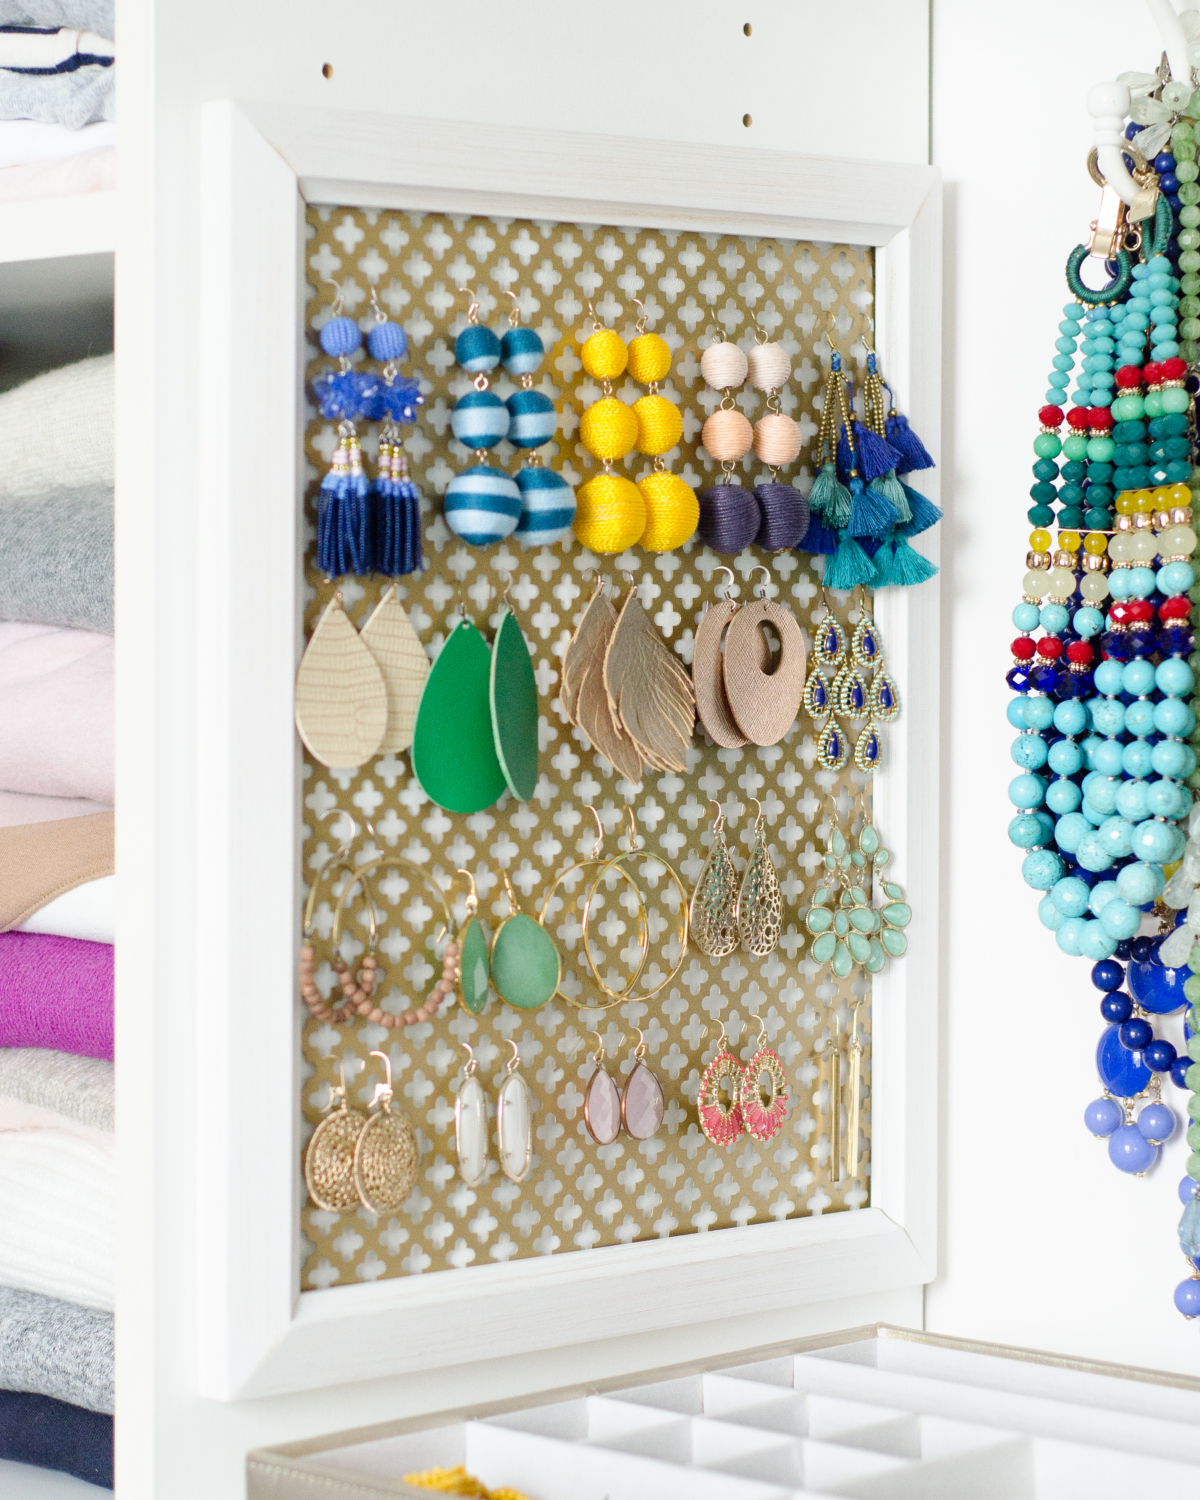 DIY Earring Organizer in Five Minutes! - The Chronicles of Home